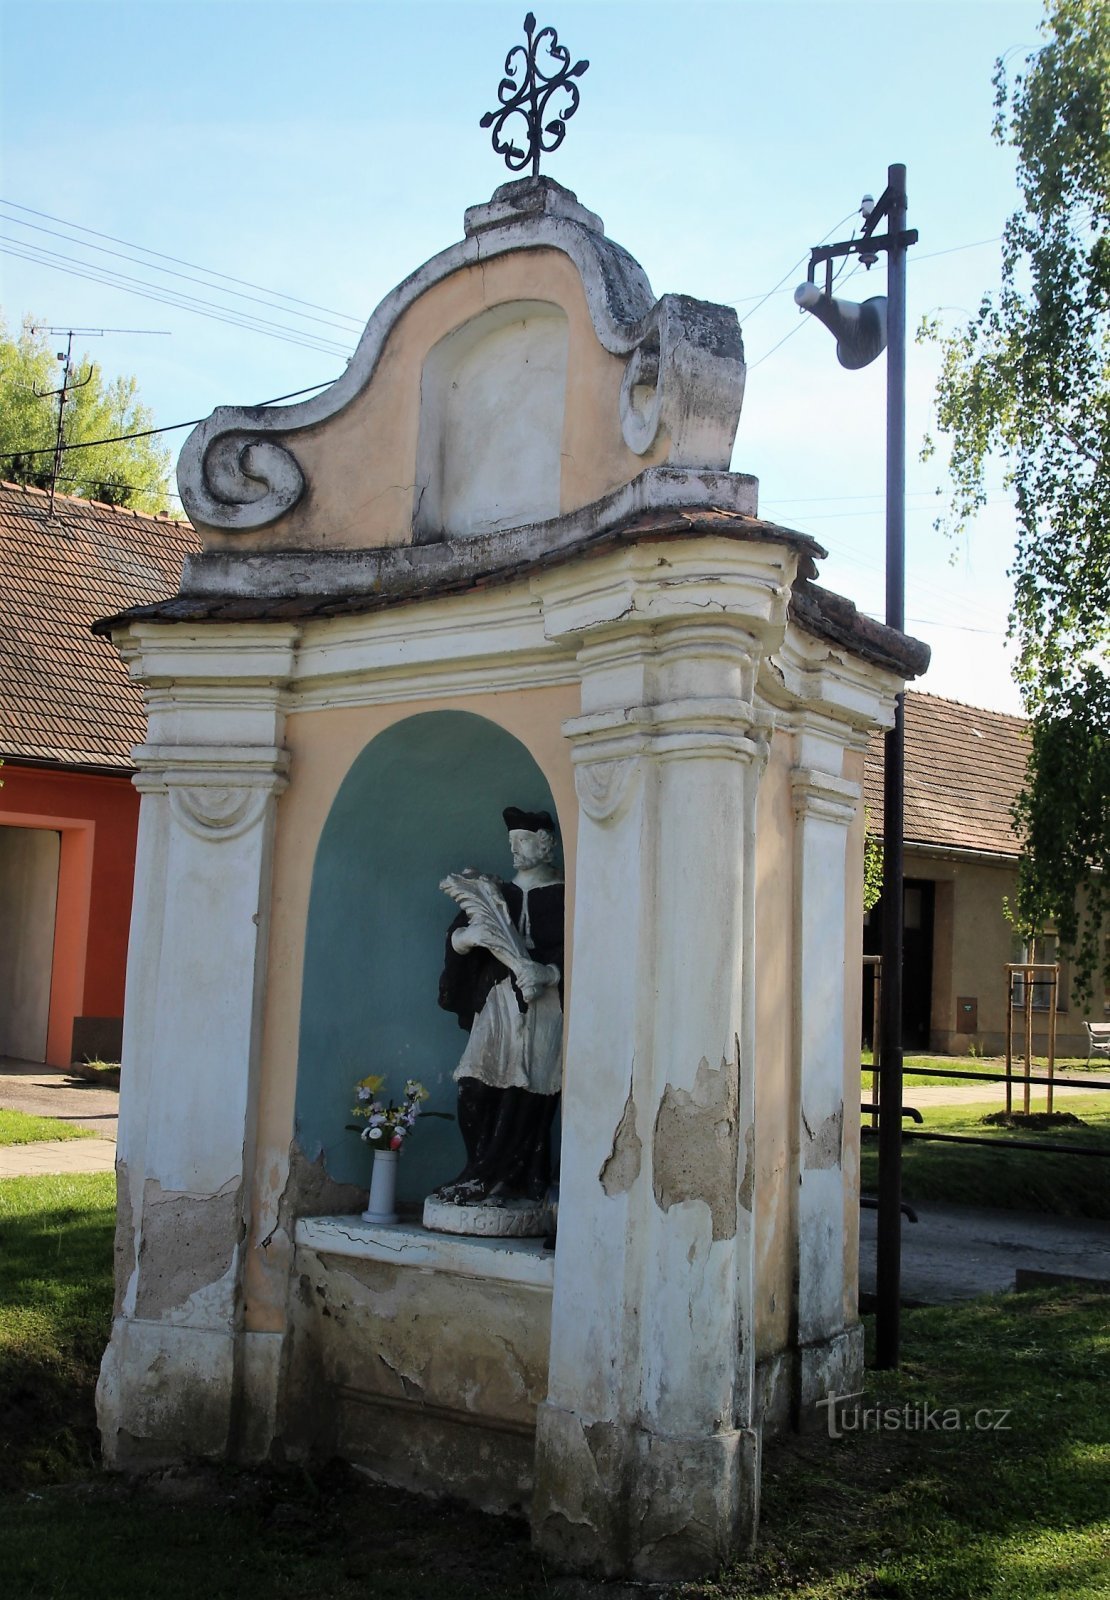 Baroque niche chapel with a statue of St. Jan Nepomucký.